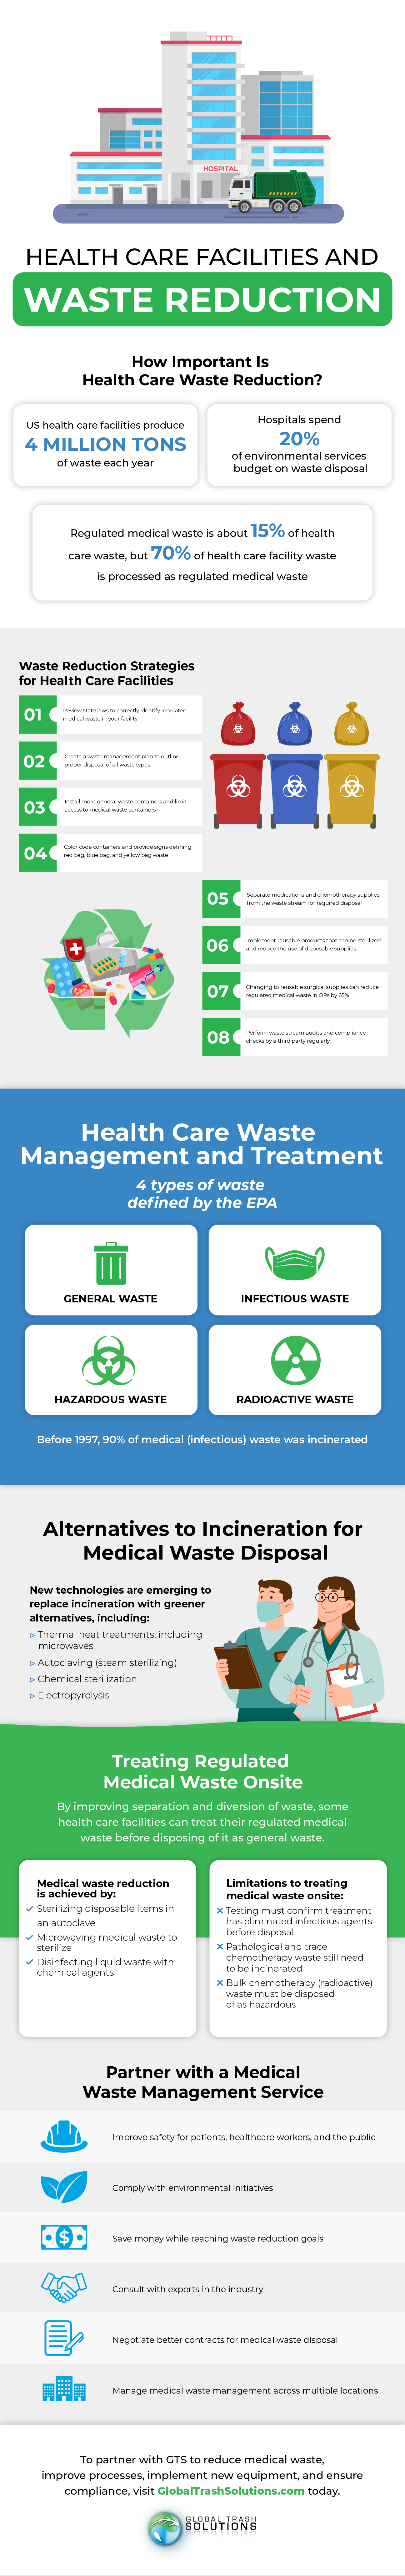 Health Care Facilities and Waste Reduction Infographic